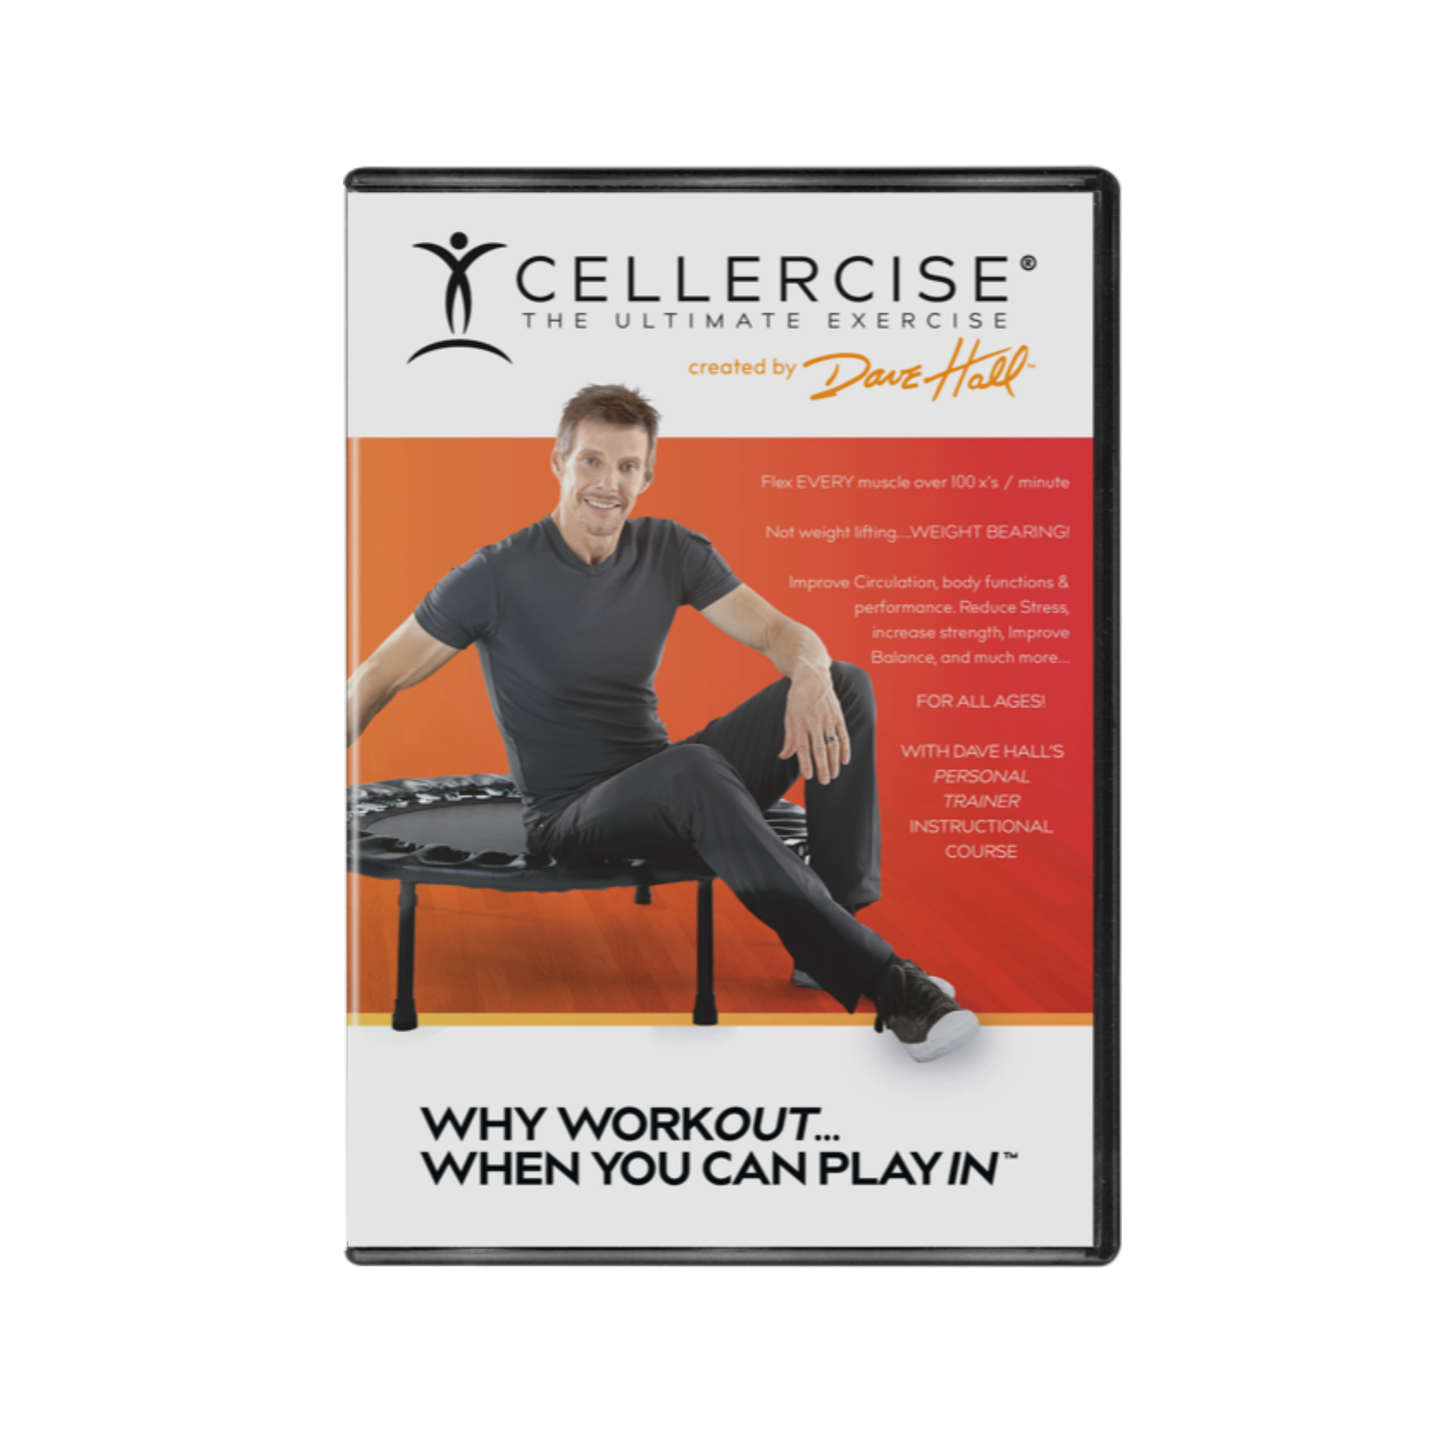 cellercise the ultimate exercise dave hall rebounder mini trampoline home gym workout video dvd exercises fitness download